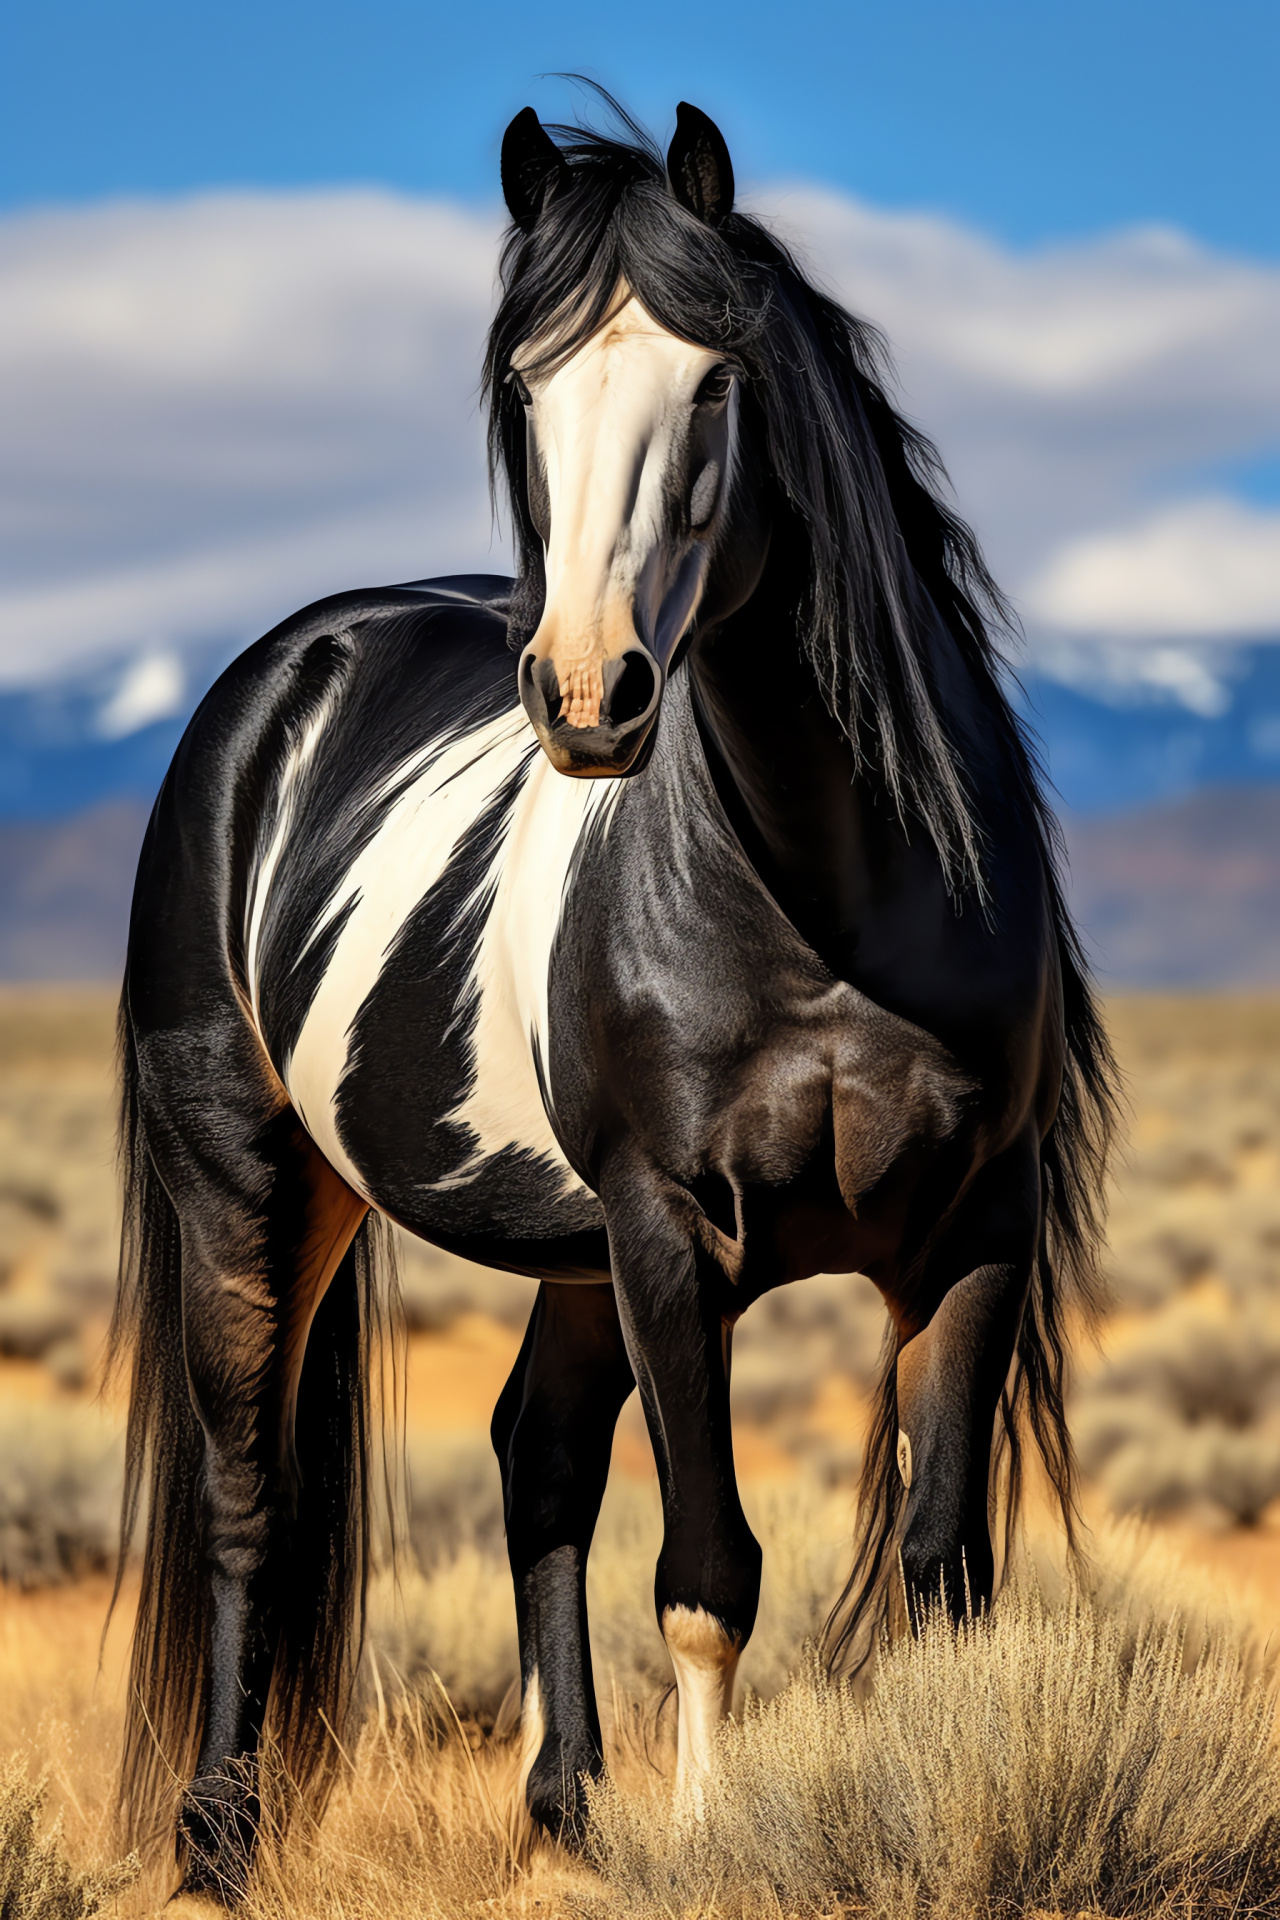 Galloping equine, Striking equestrian figure, Multi-hued environment, Expansive field view, Noble creature, HD Phone Wallpaper